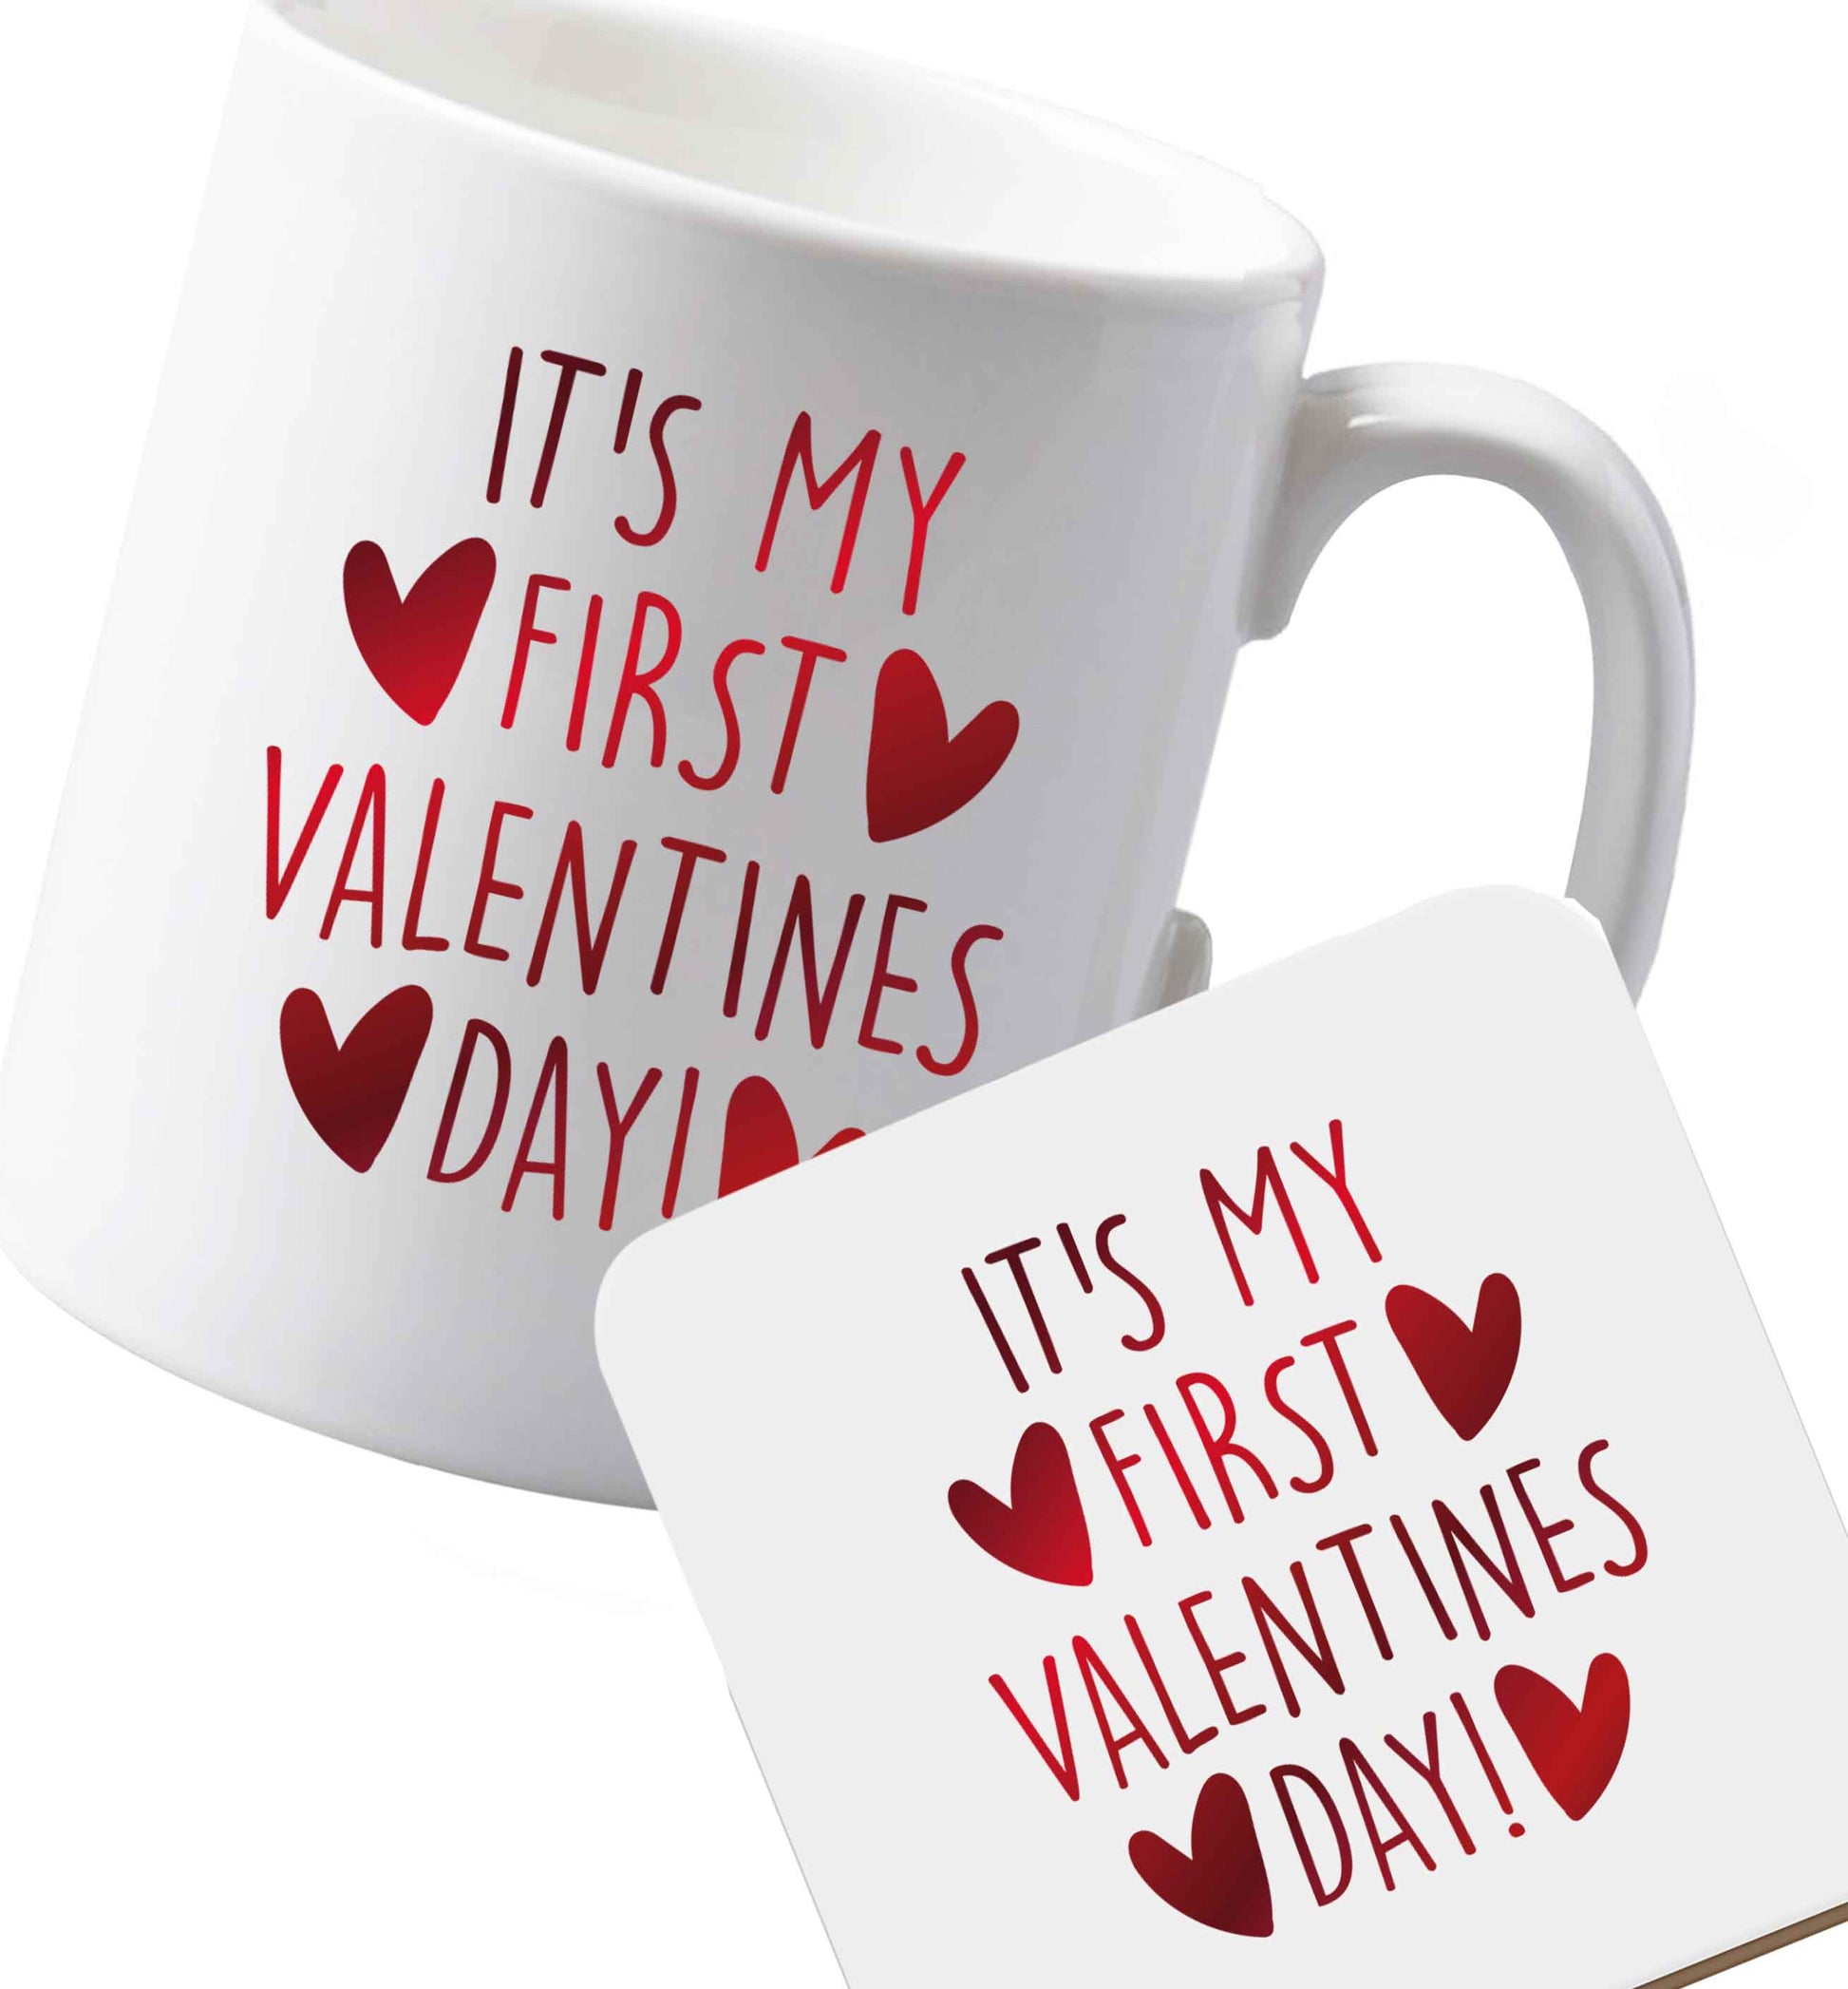 10 oz Ceramic mug and coaster It's my first valentines day! both sides